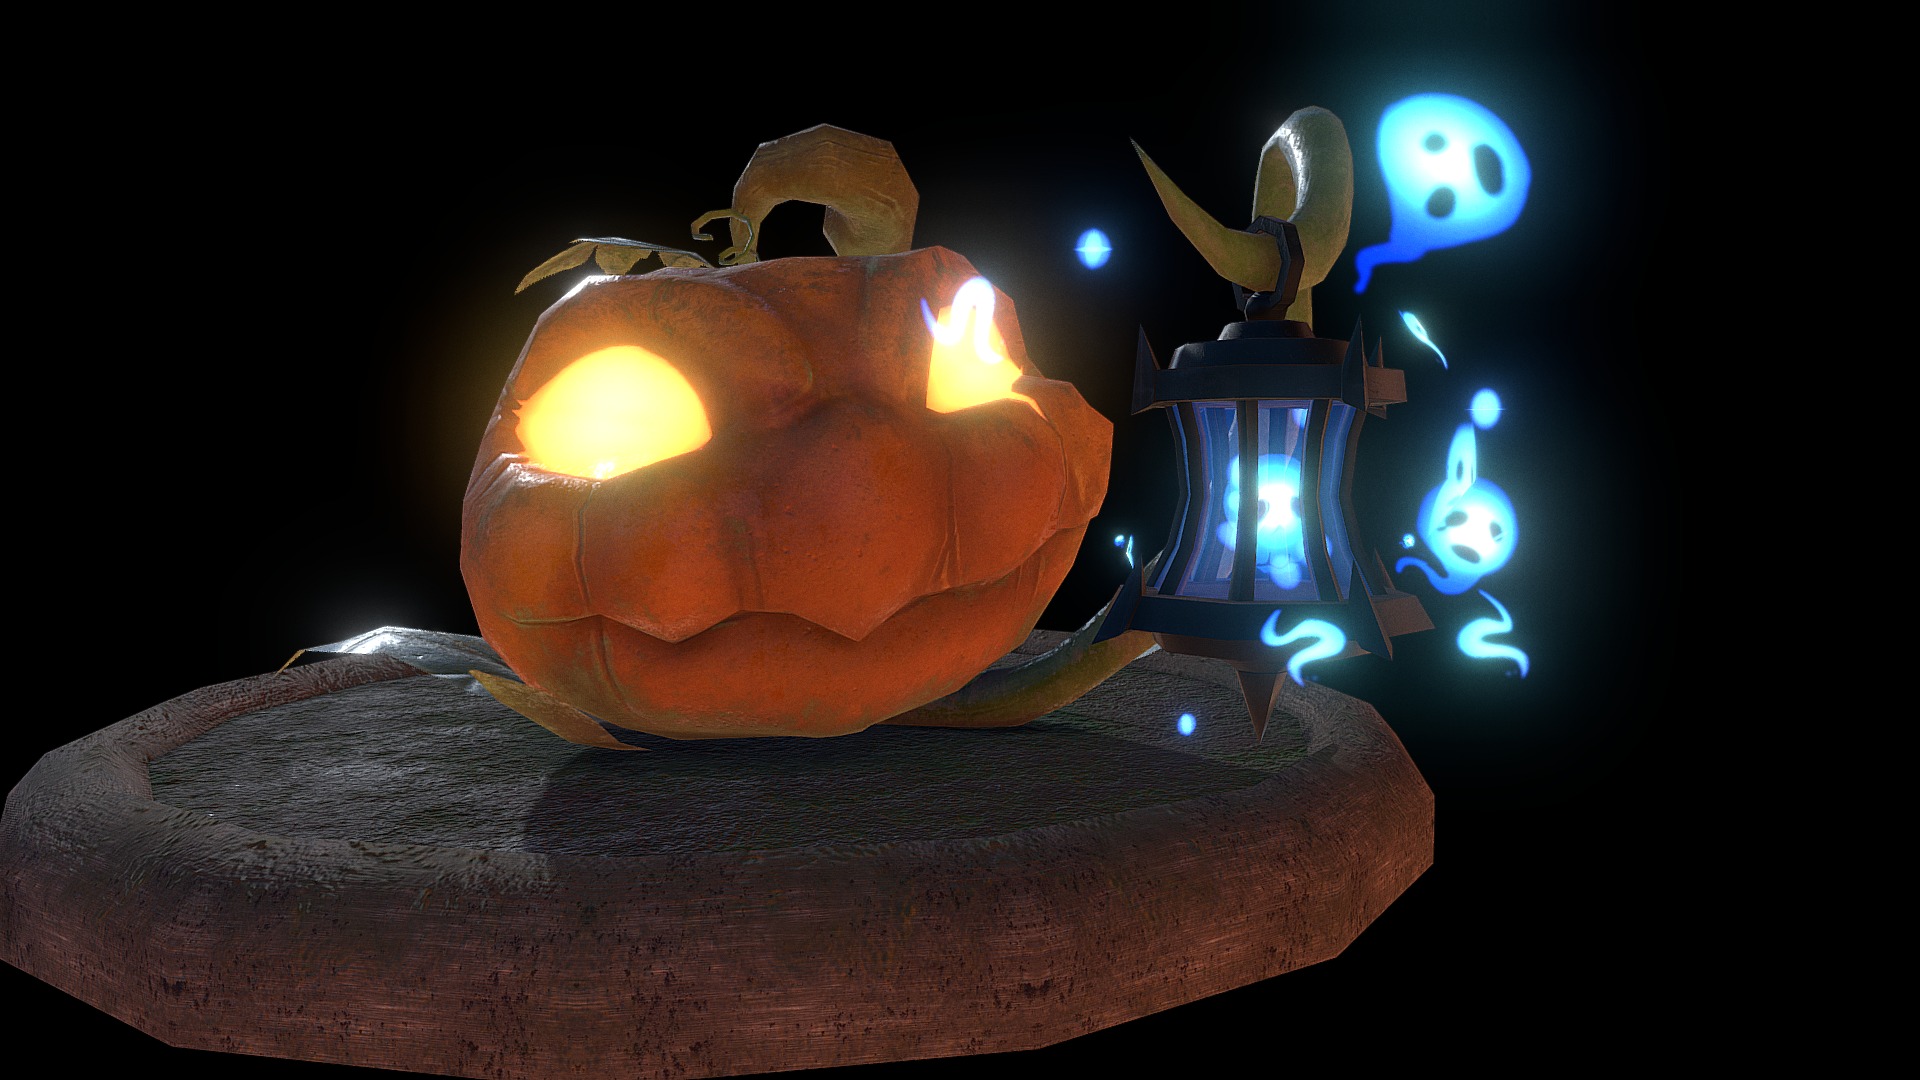 More exploration of using Substance Painter to create PBR textures. Since Halloween just ended and thought of doing a theme based based on a Jack-o-Lantern and Tarot card for Hermit carrying a lantern full of souls. 

Software Used: Maya, Substance Painter, xNormal, Photoshop - Pumpkit - Hermit of Souls - 3D model by 13luj 3d model